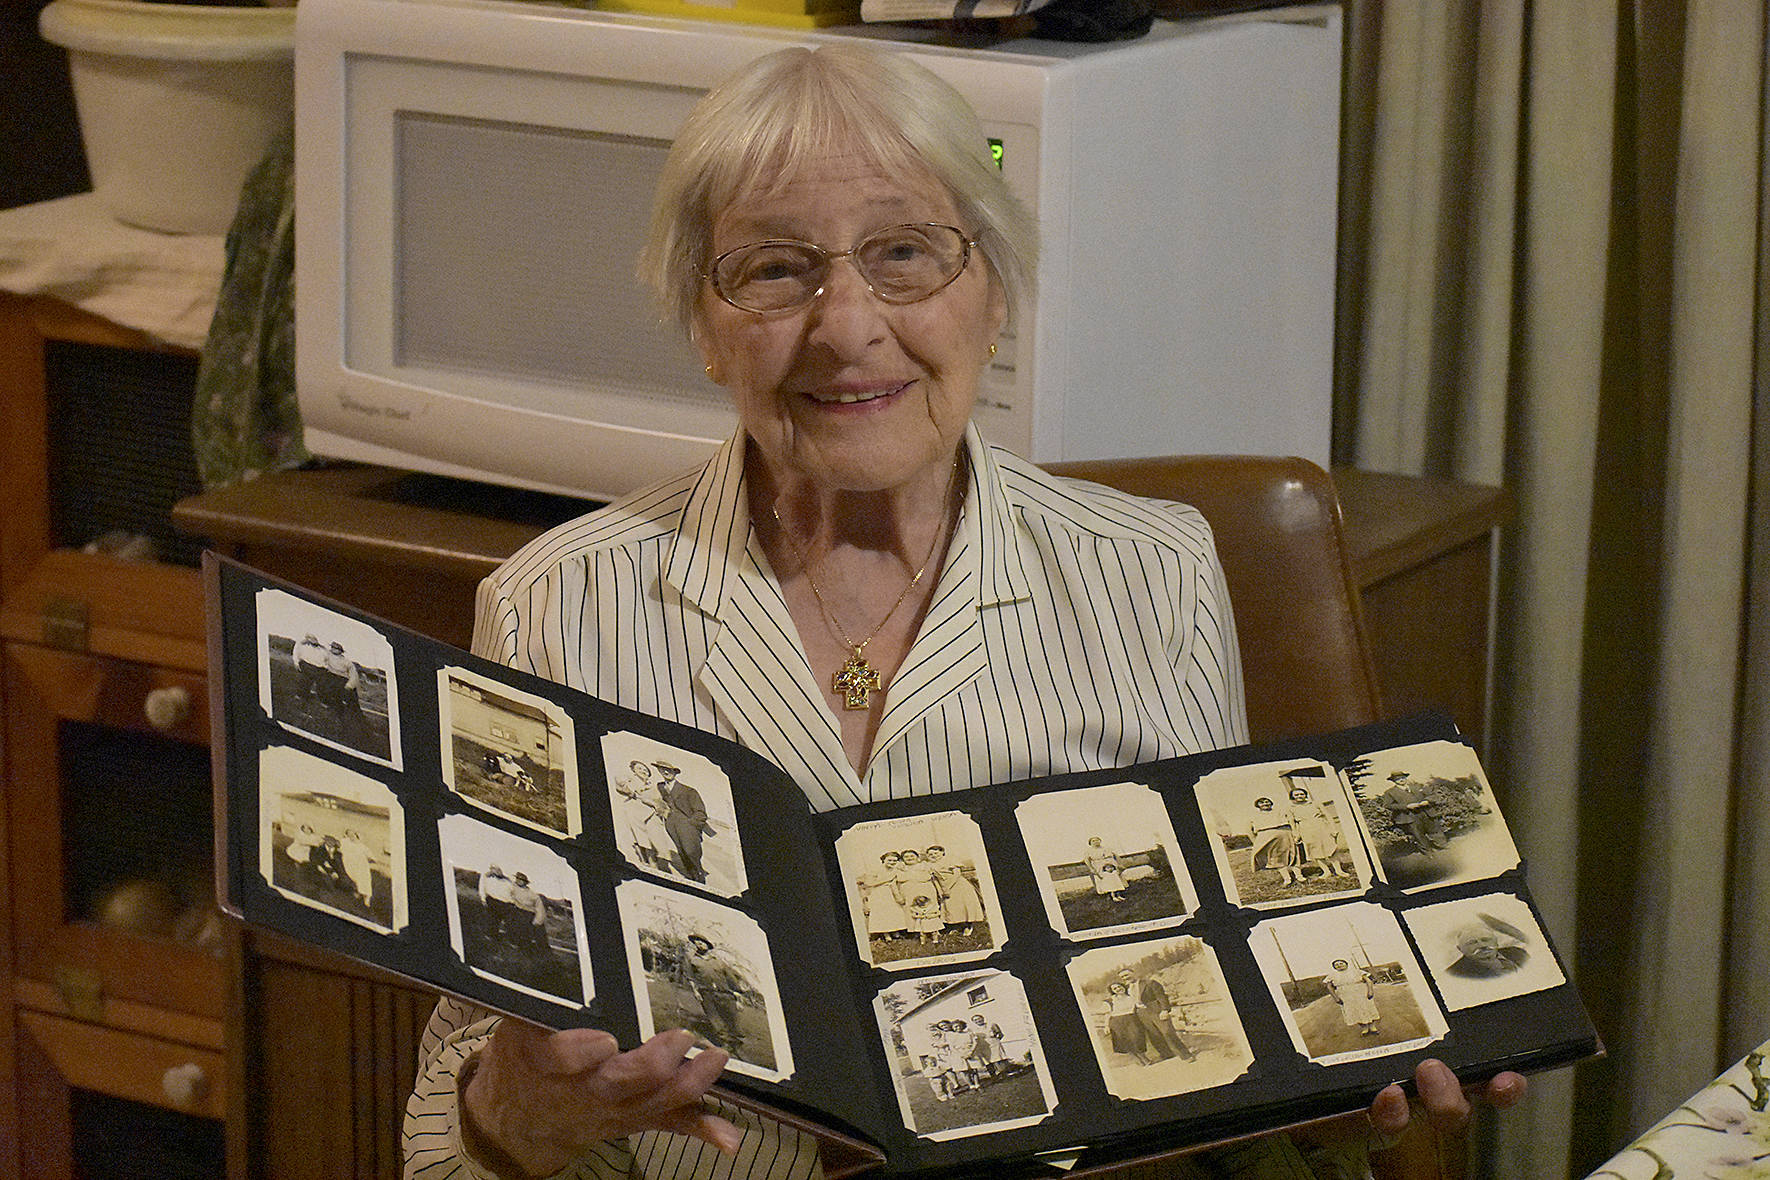 Photo by Haley Ausbun.                                Wanda “Noni” Capellaro reflects on 100 years in Renton, looking at photos of friends and family past.